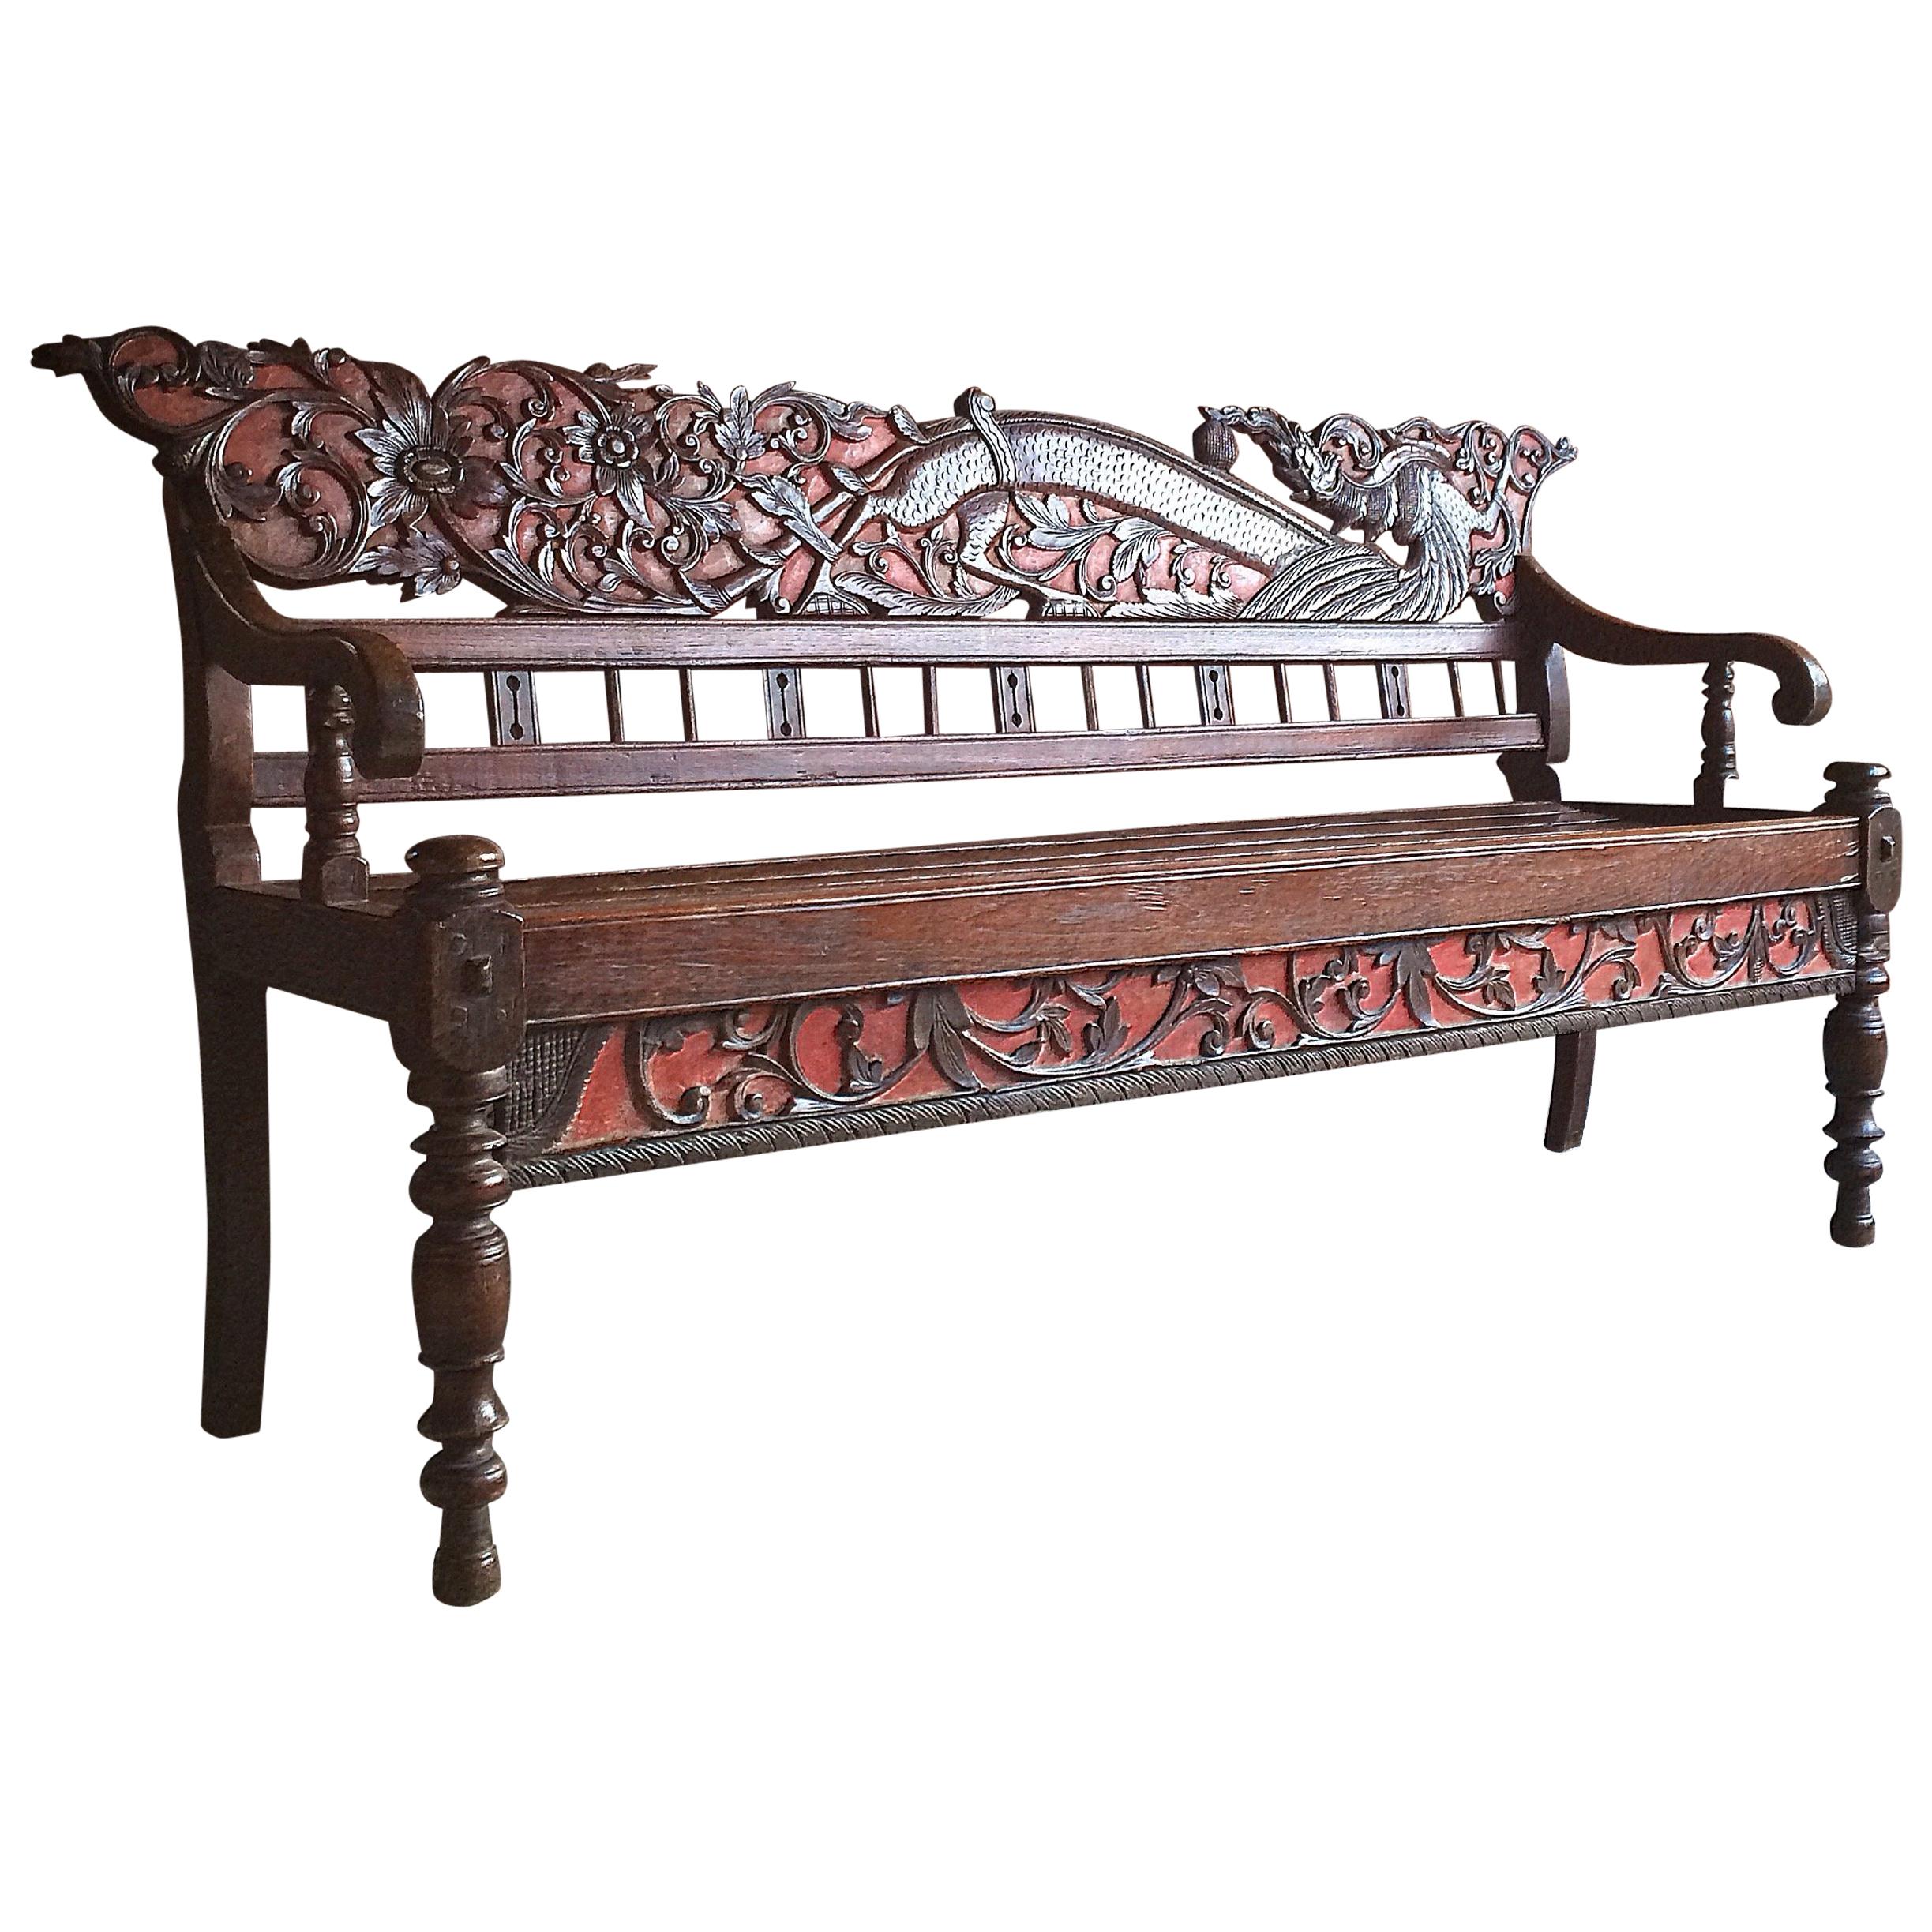 Antique Chinese Hall Seat Bench Heavily Carved Qing Dynasty 19th Century 1860